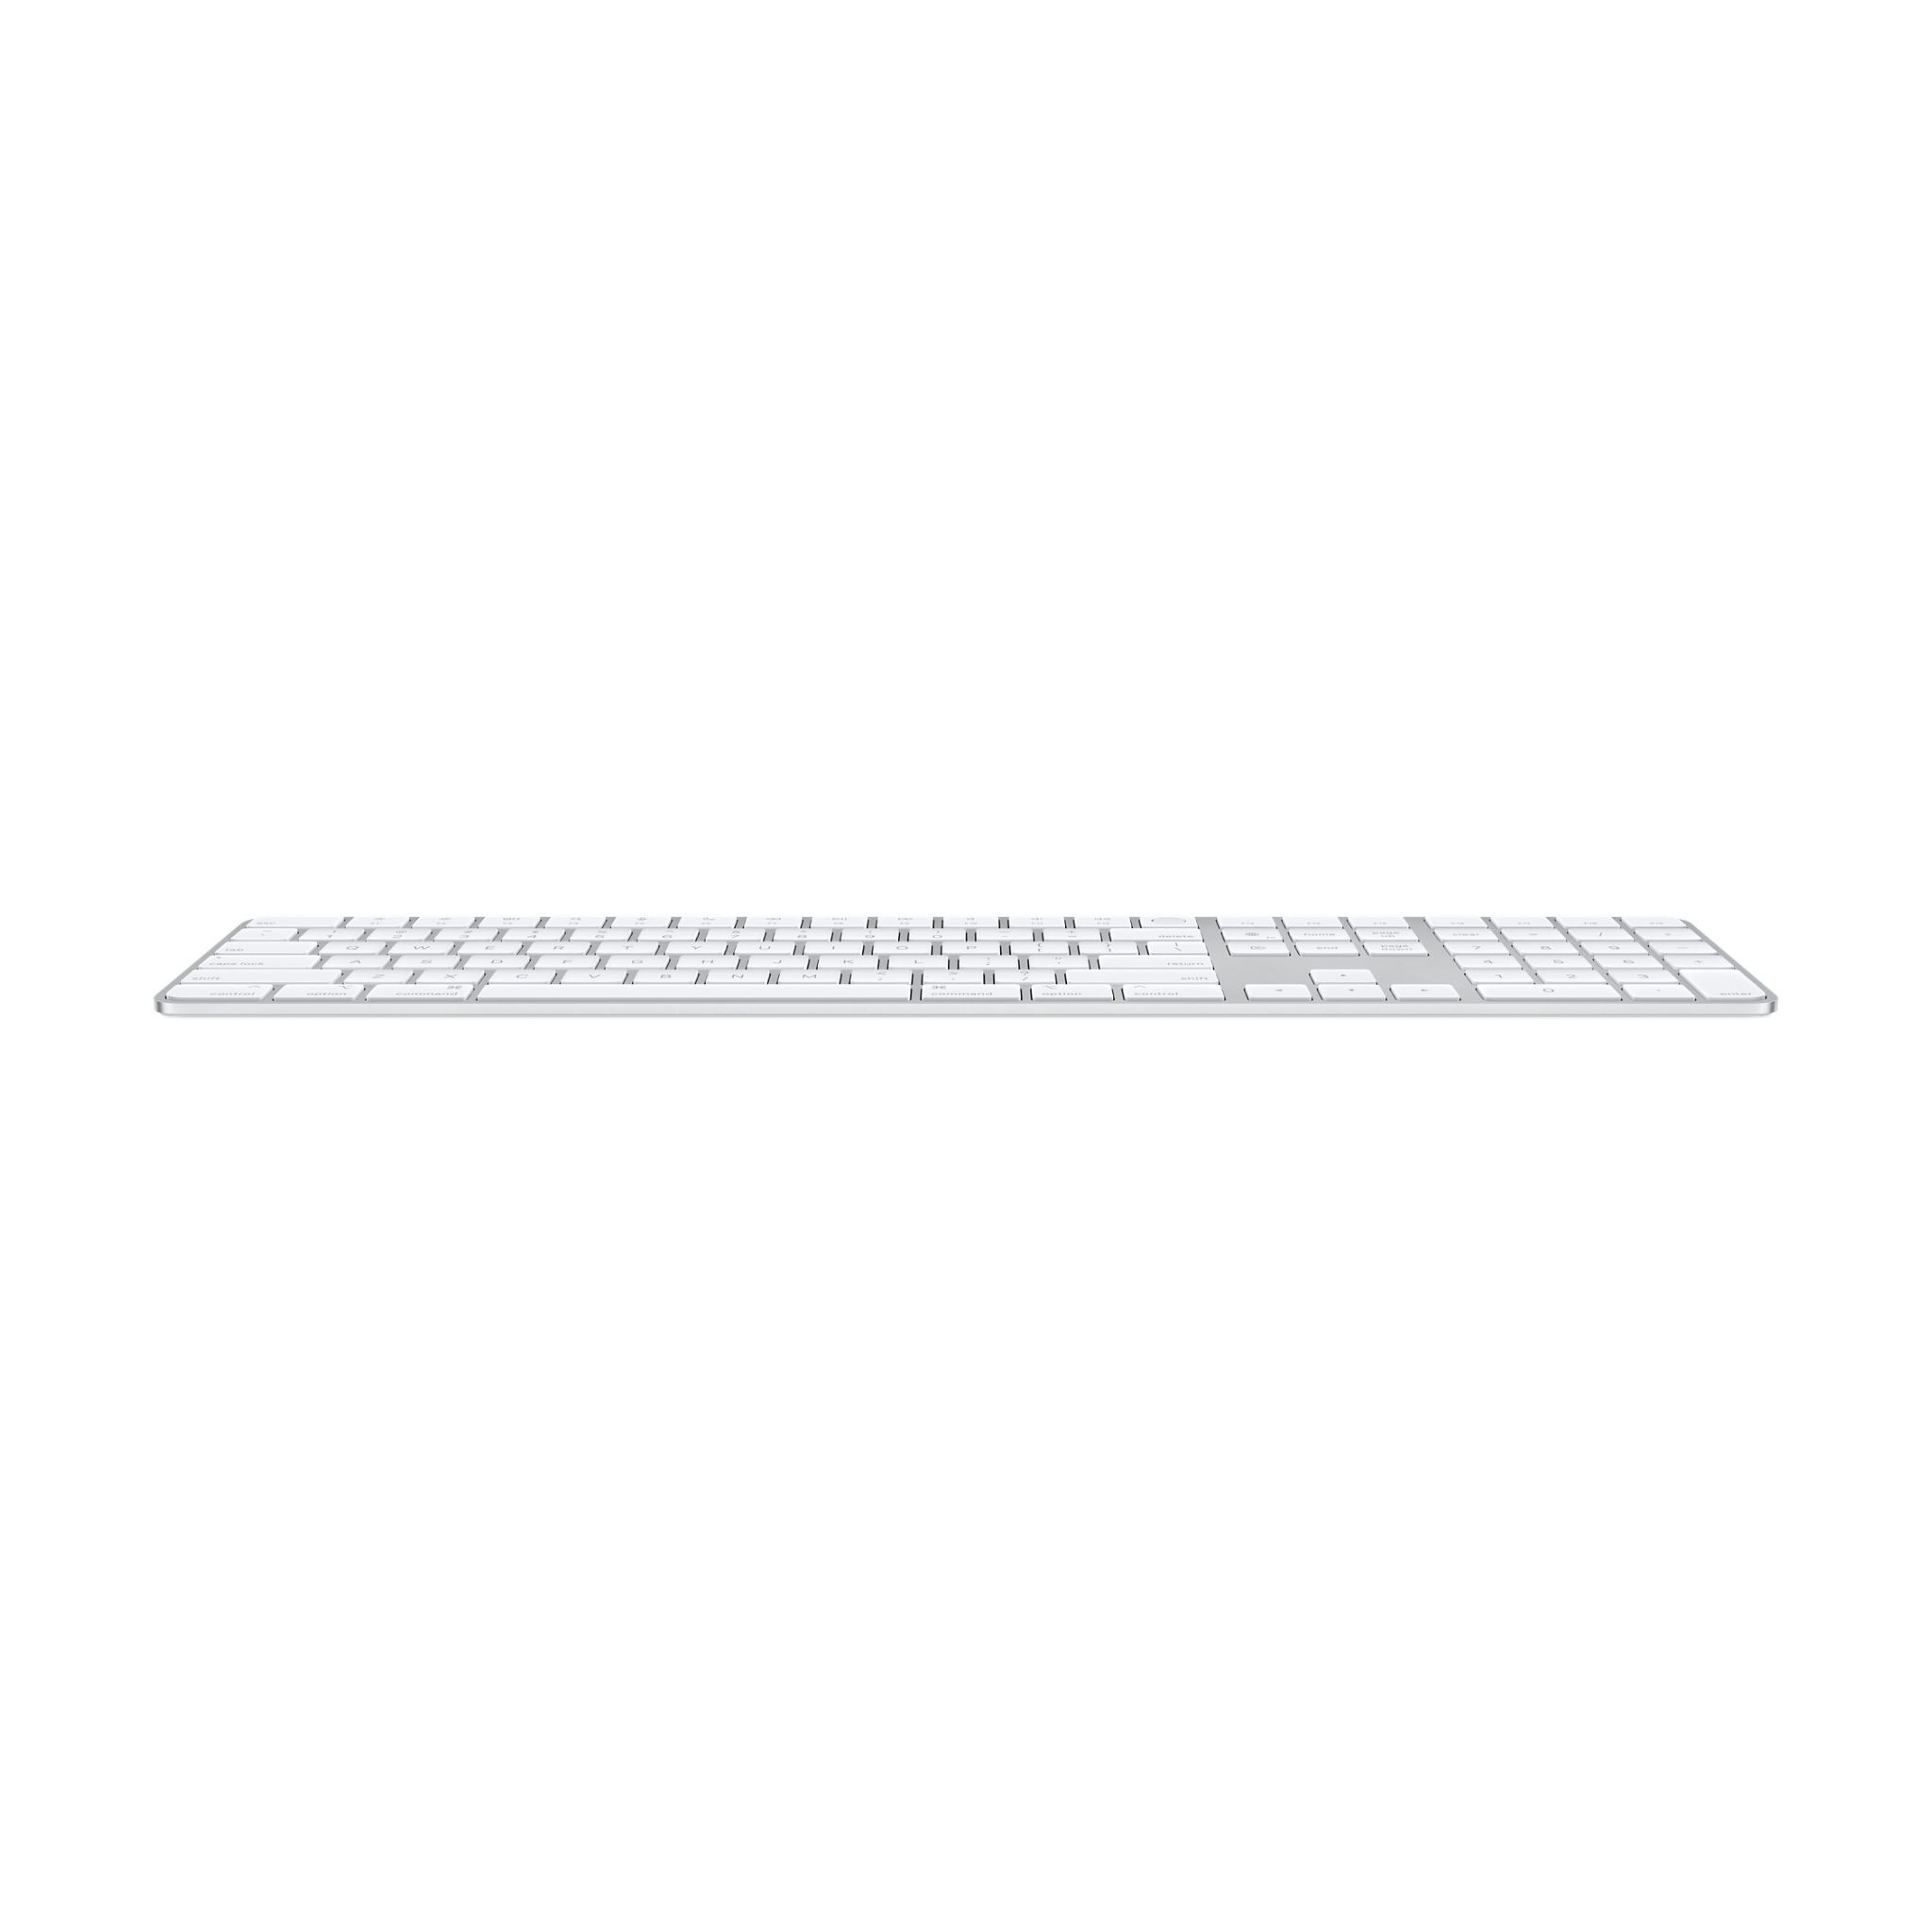 Magic Keyboard with Touch ID and Numeric Keypad for Mac models with Apple silicon - British English